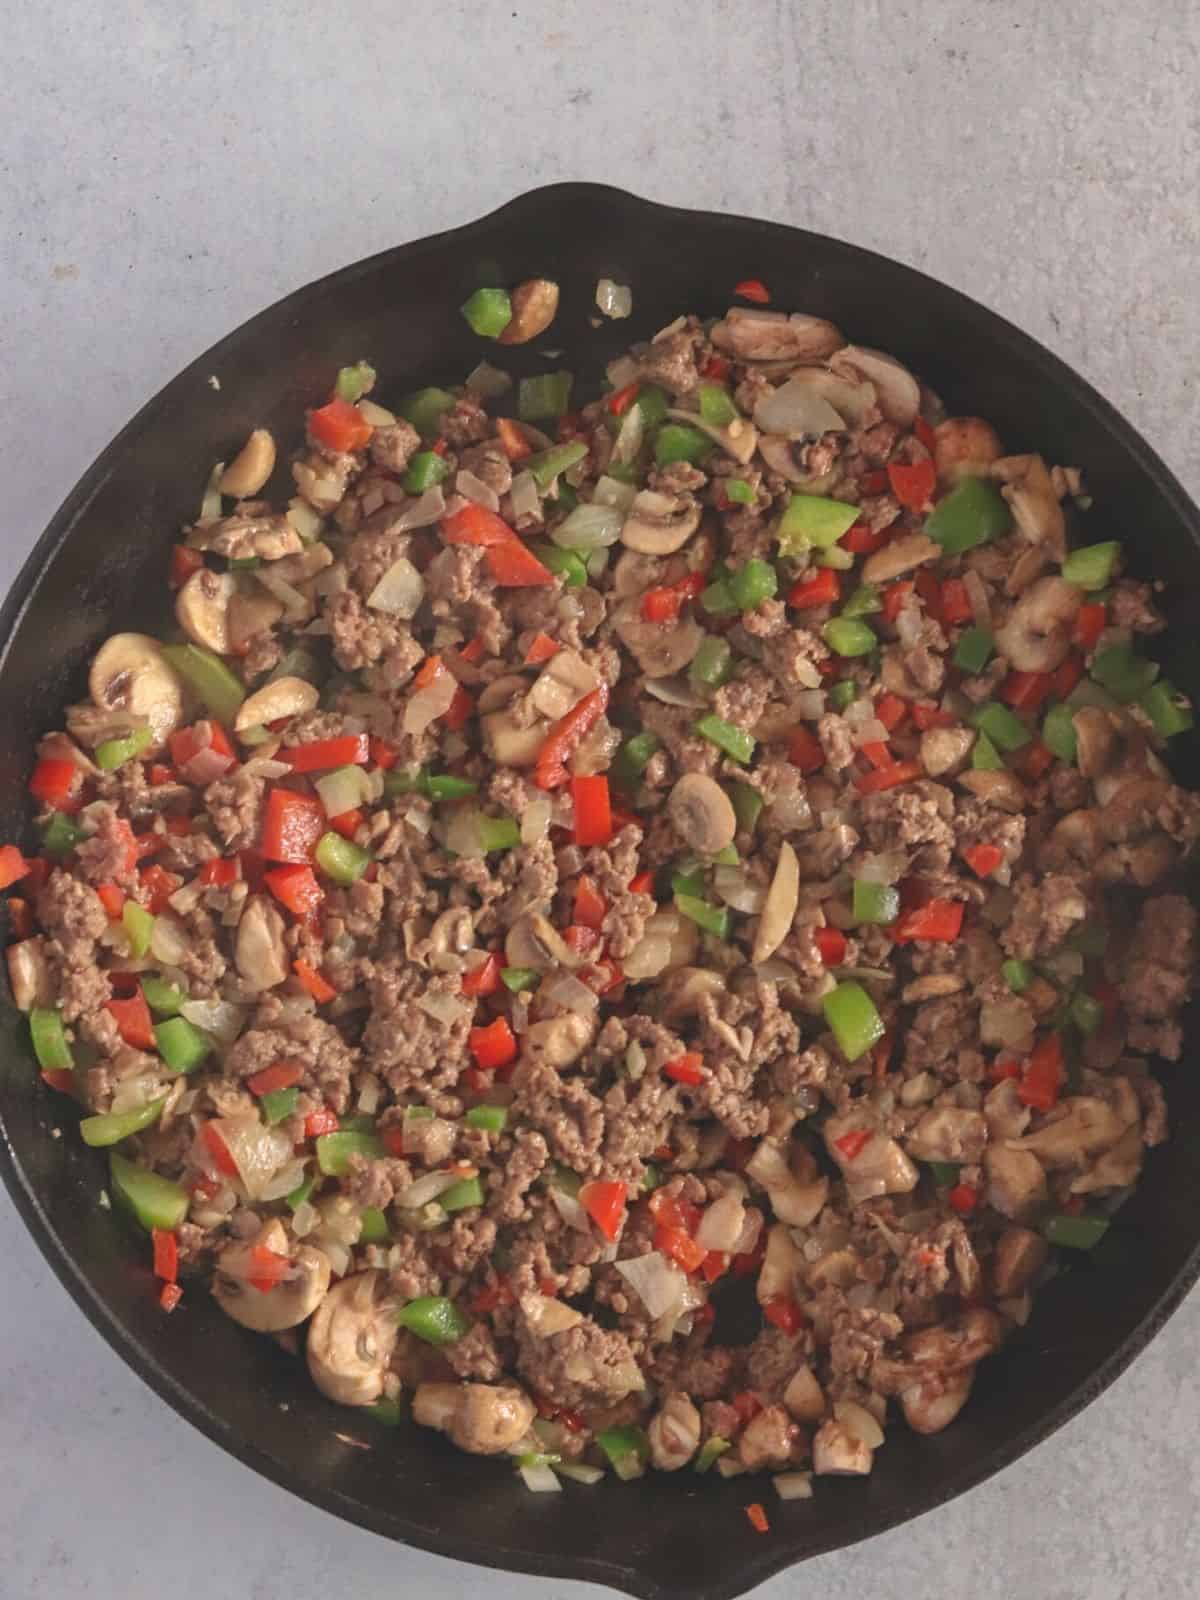 impossible meat, bell peppers, mushrooms and onion